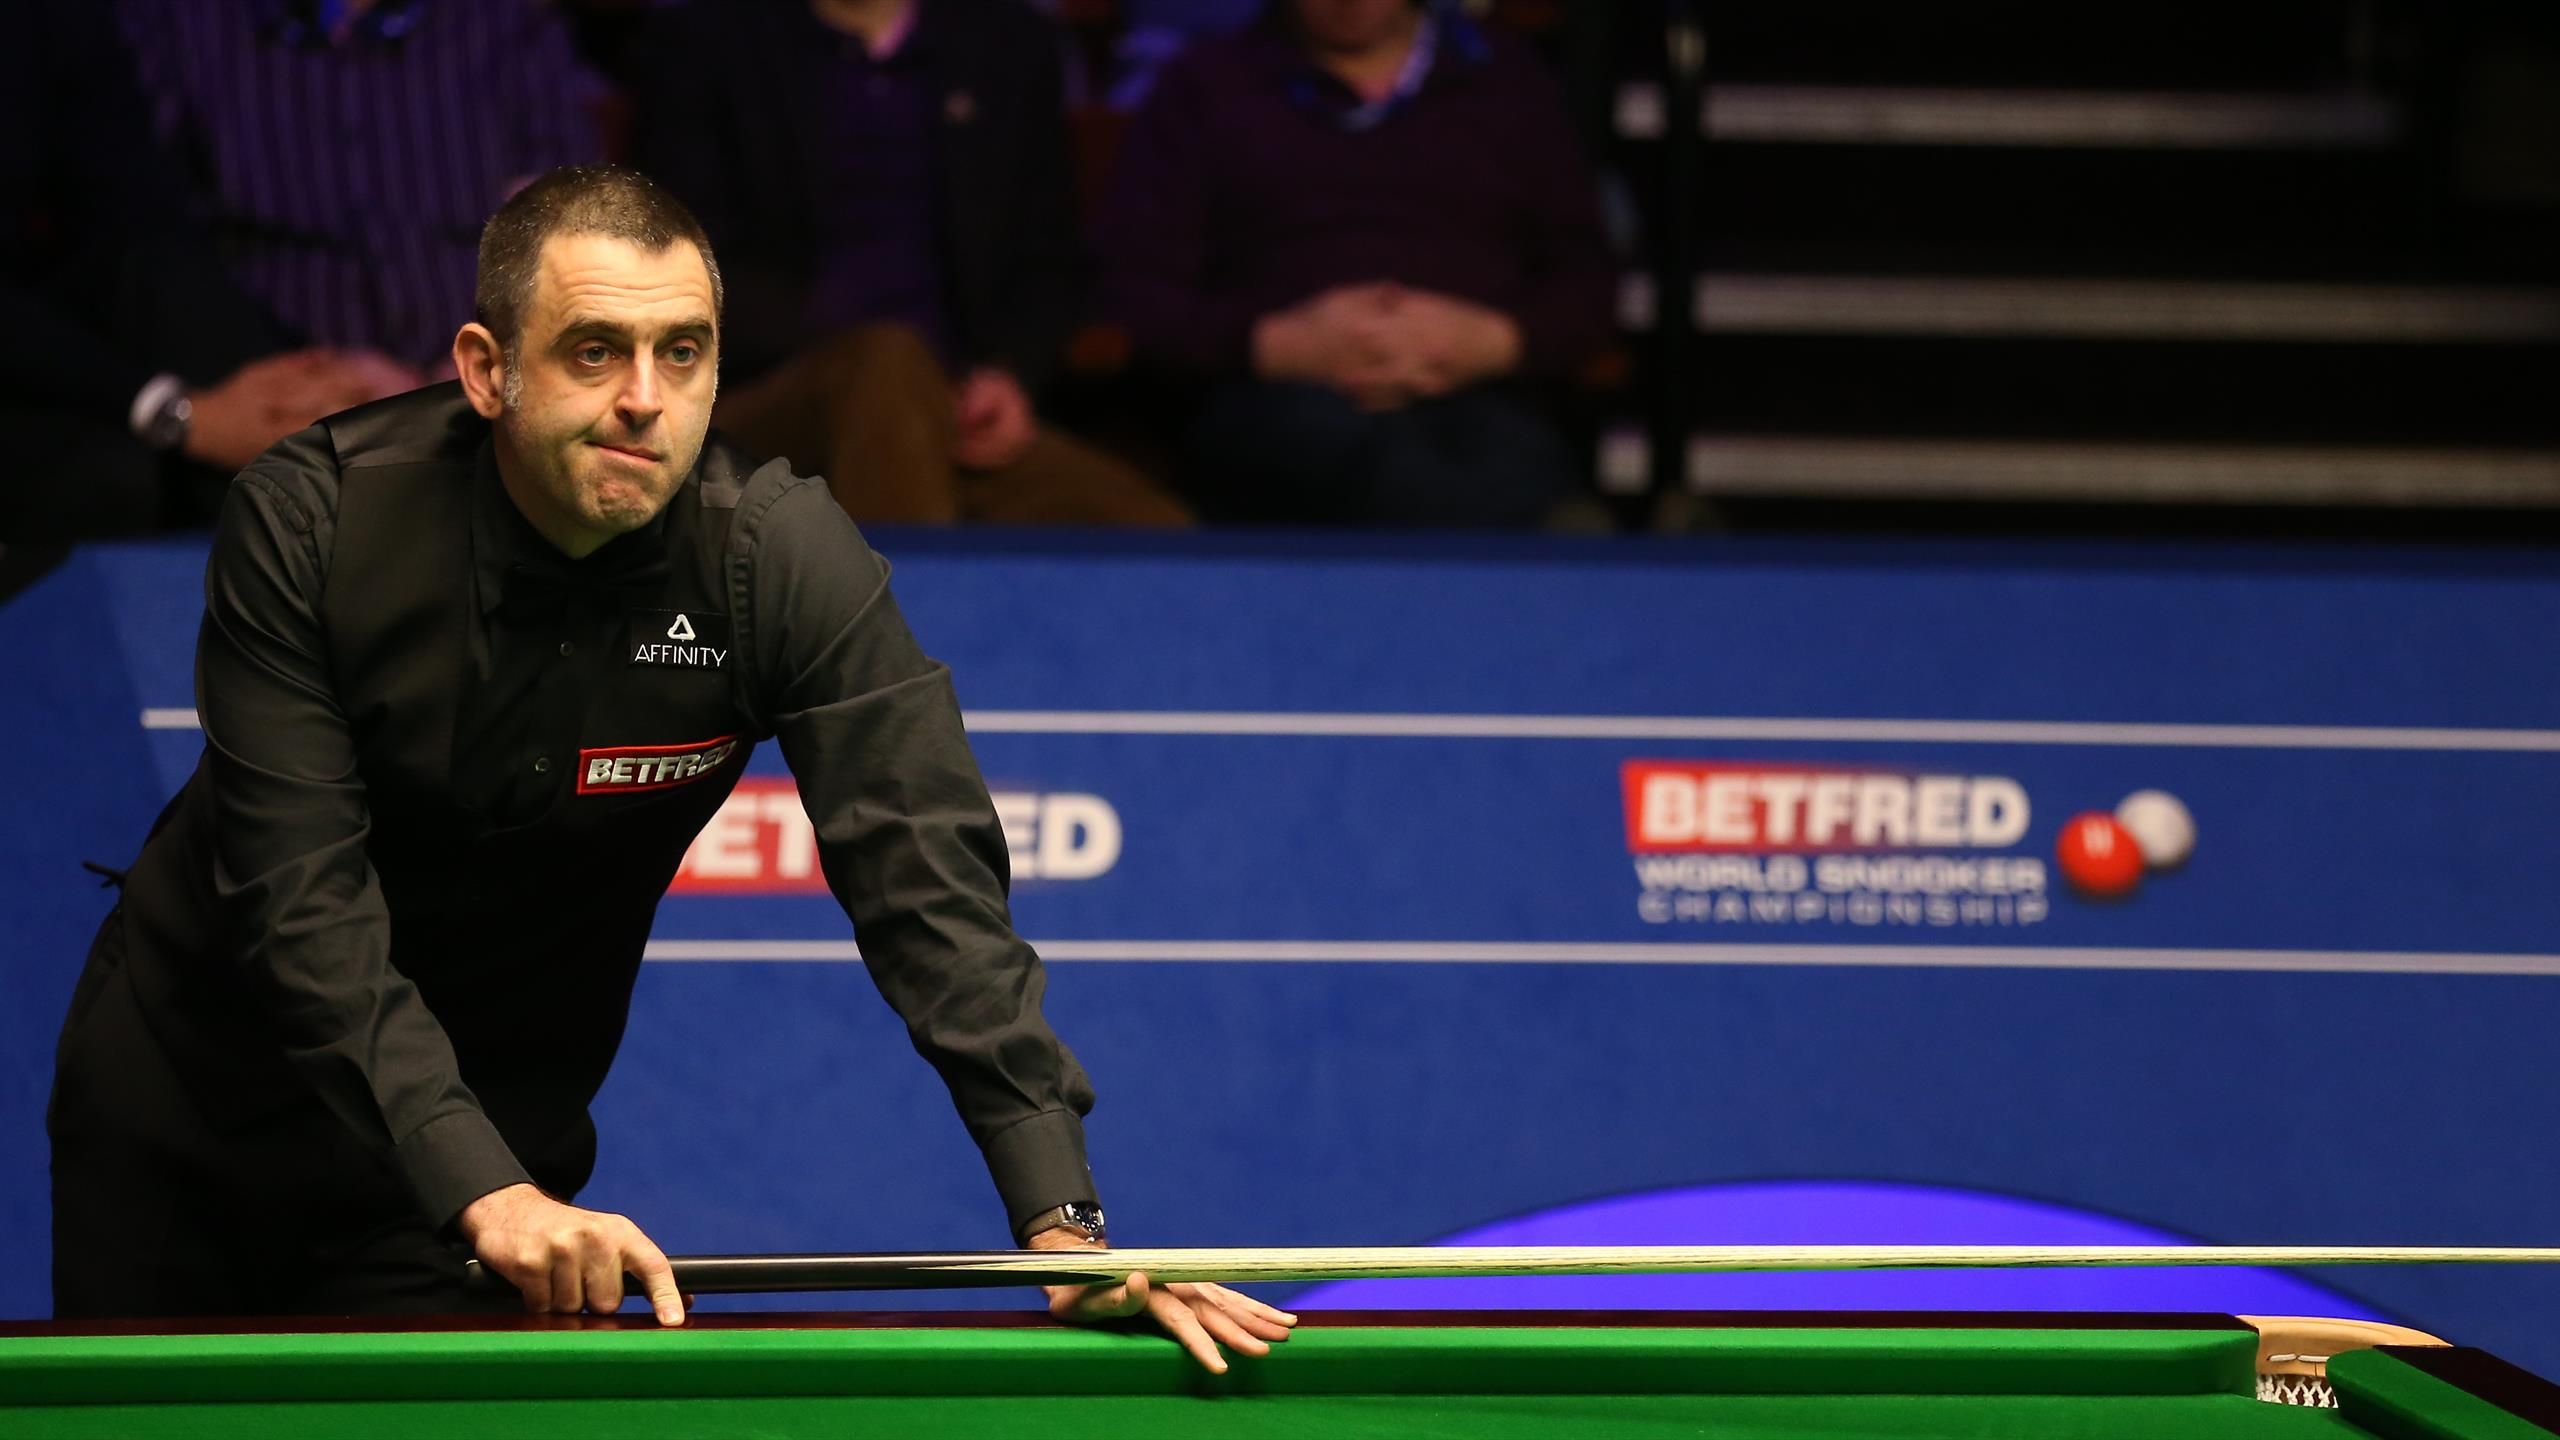 World Snooker Championship 2021 - Draw, Schedule, Results, order of play at the Crucible